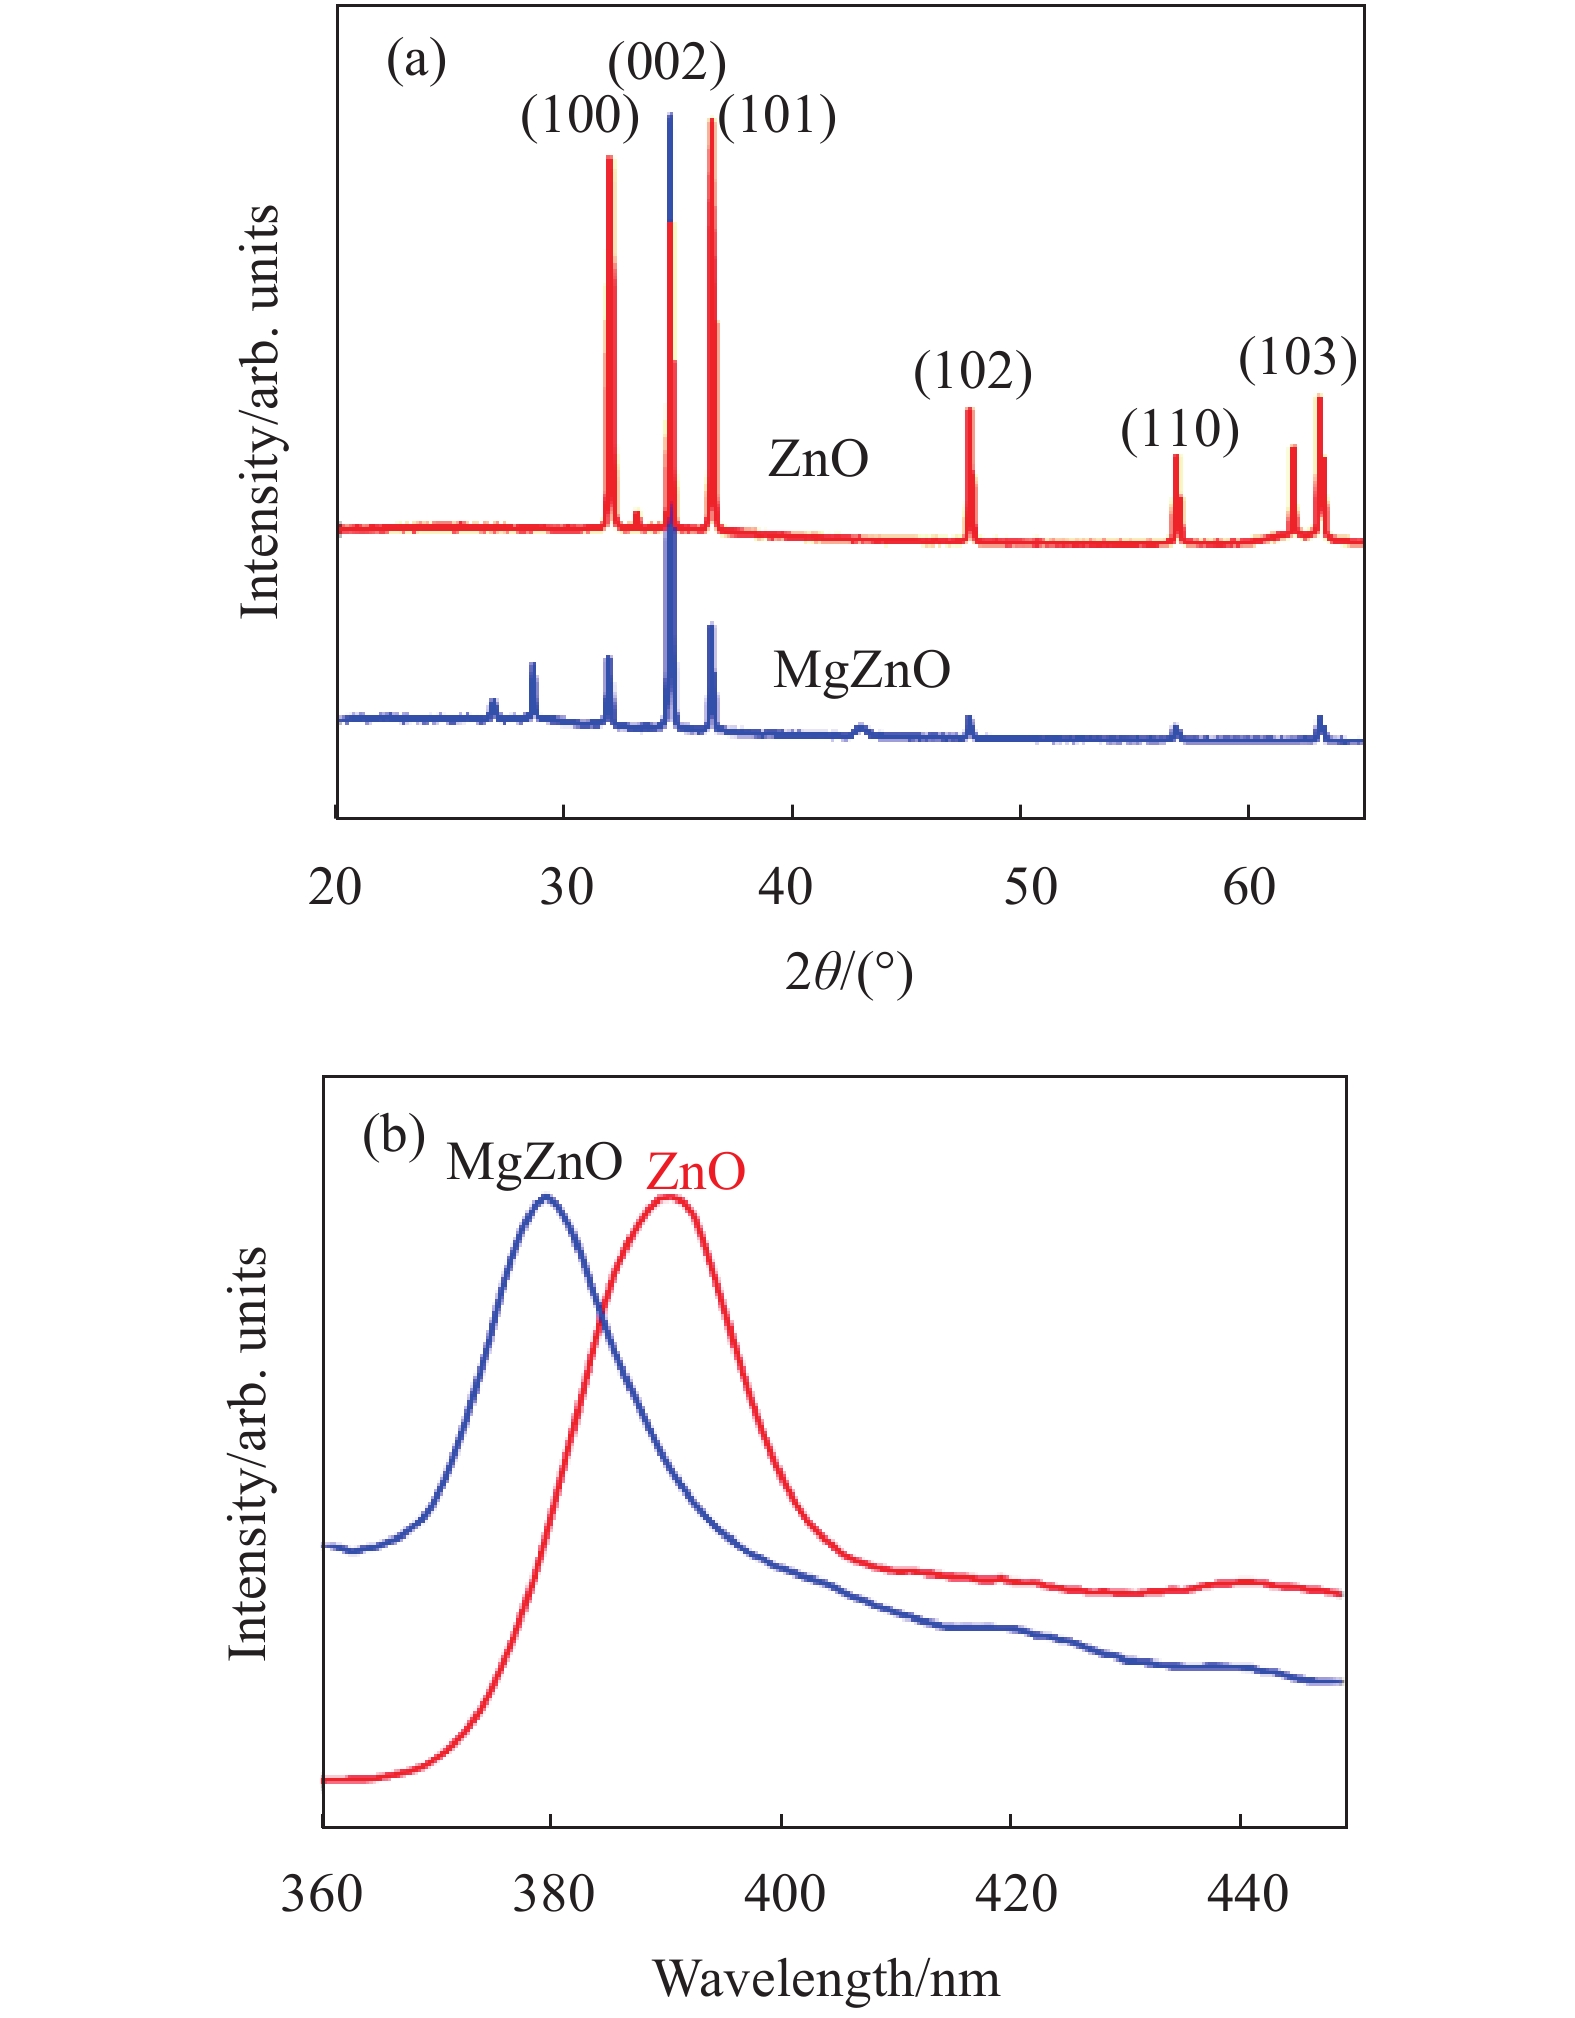 (a) XRD of the ZnO nanowires and MgZnO nanowire; (b) PL spectrum of the ZnO nanowires and MgZnO nanowire. The PL shows the peak of MgZnO blue shift